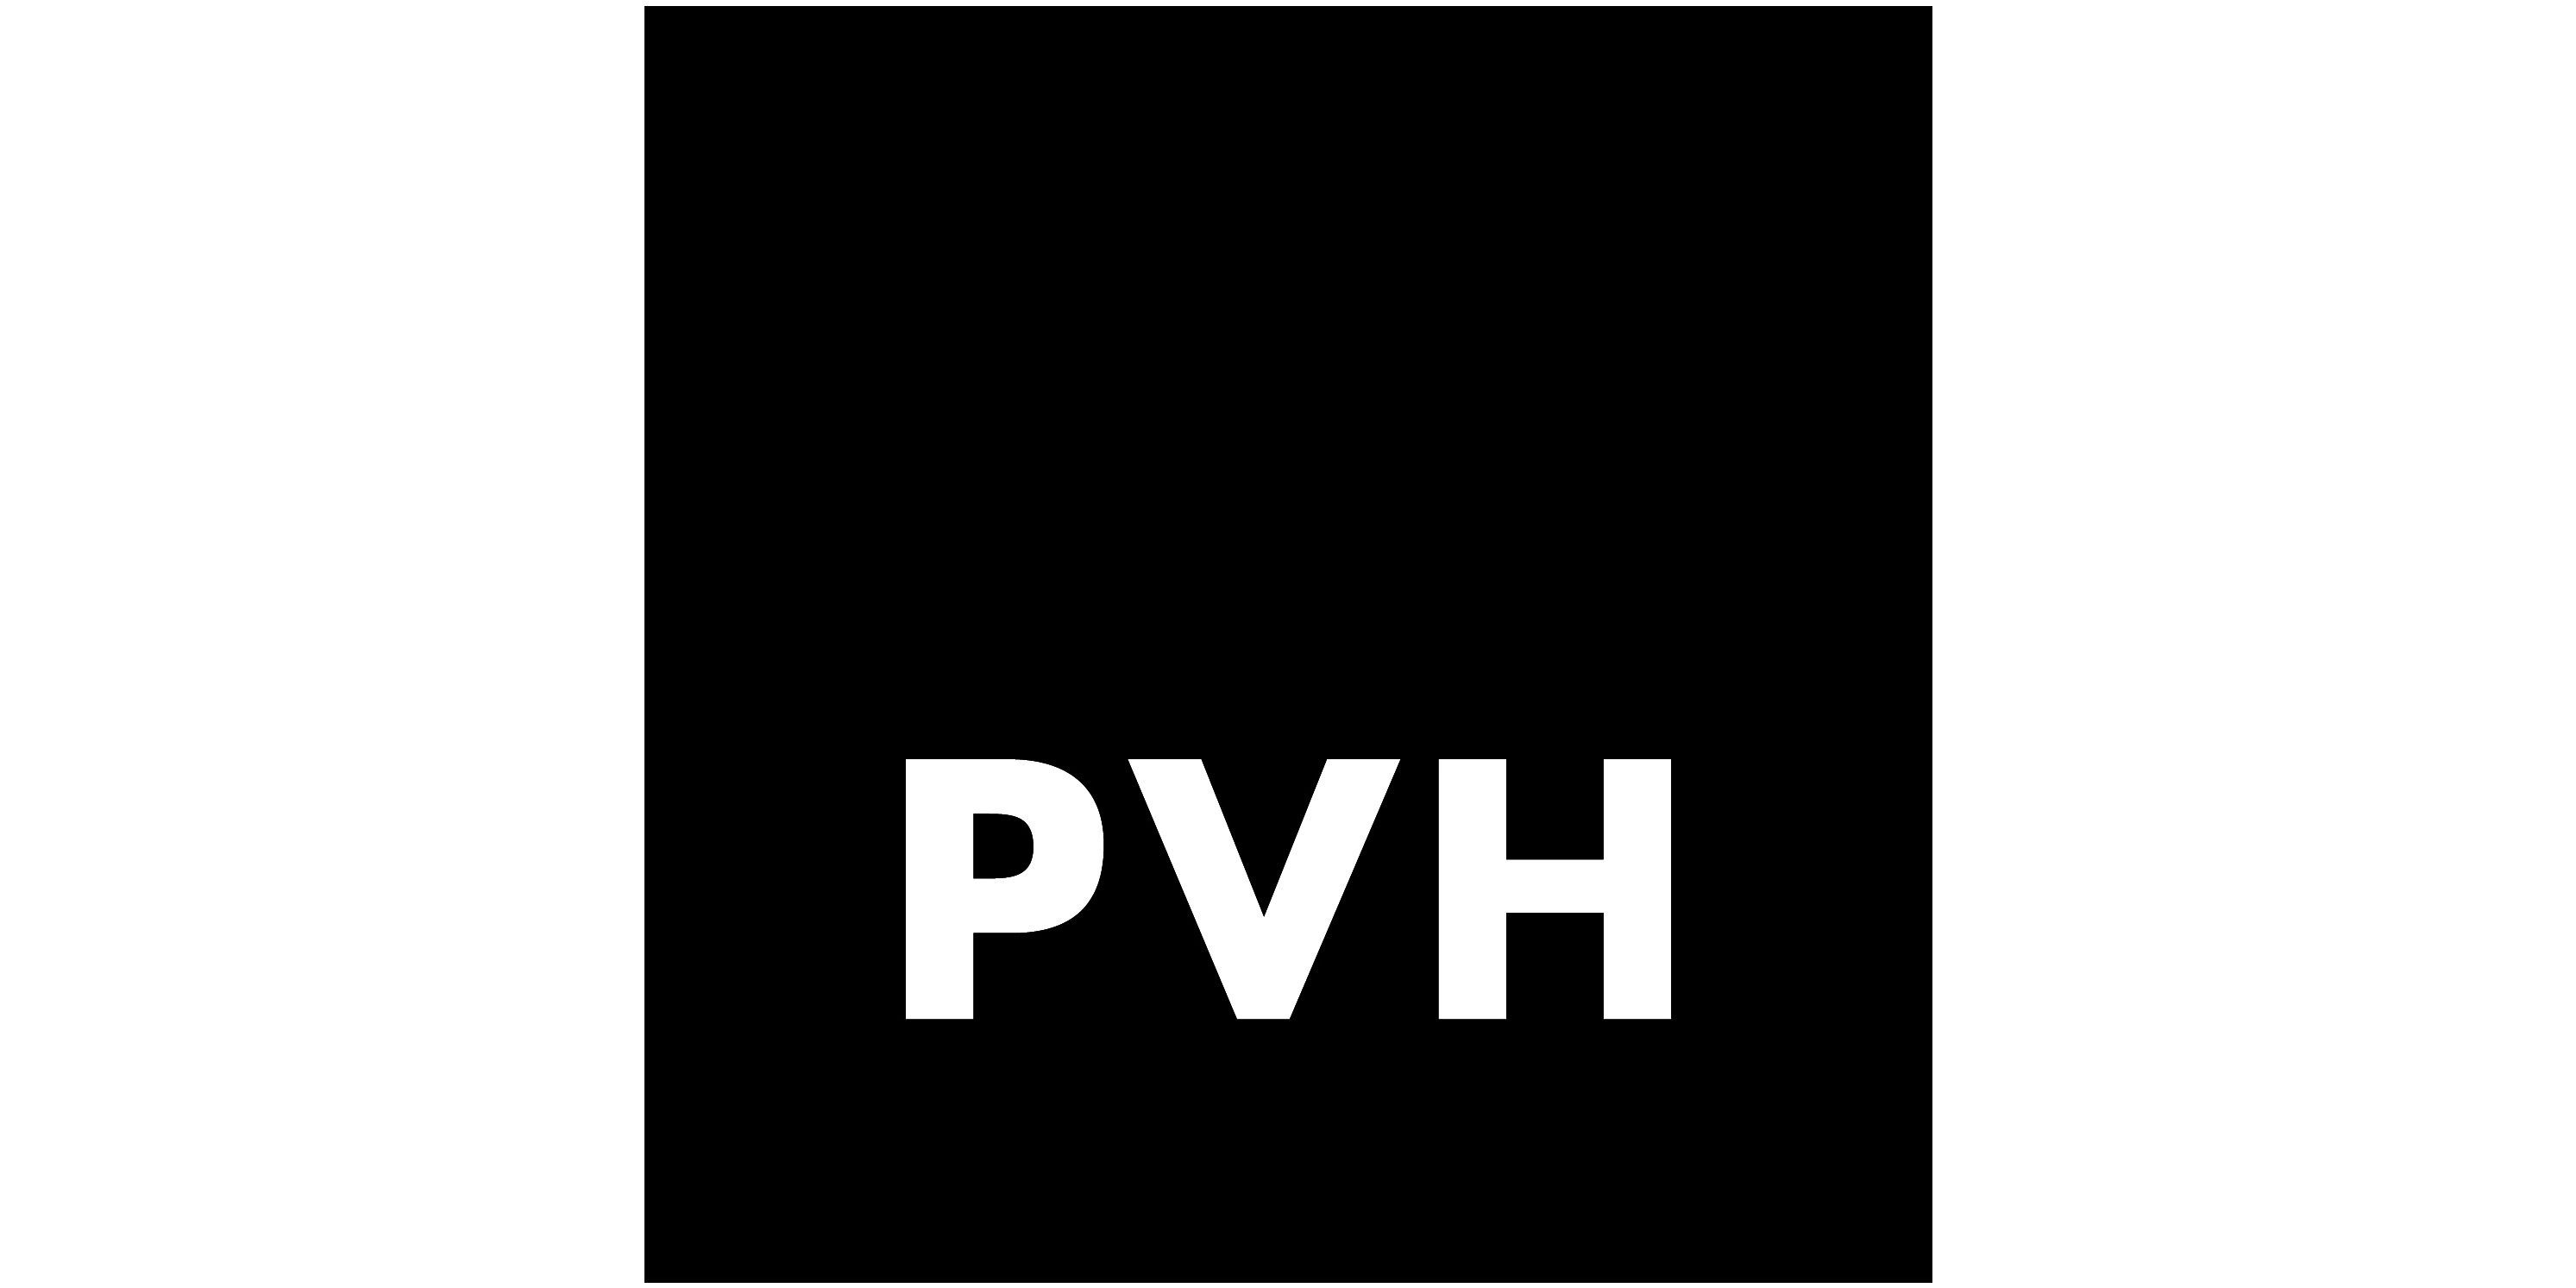 PVH is vital to building our programs for children, and we are grateful to them for their unique contributions to Save the Children.